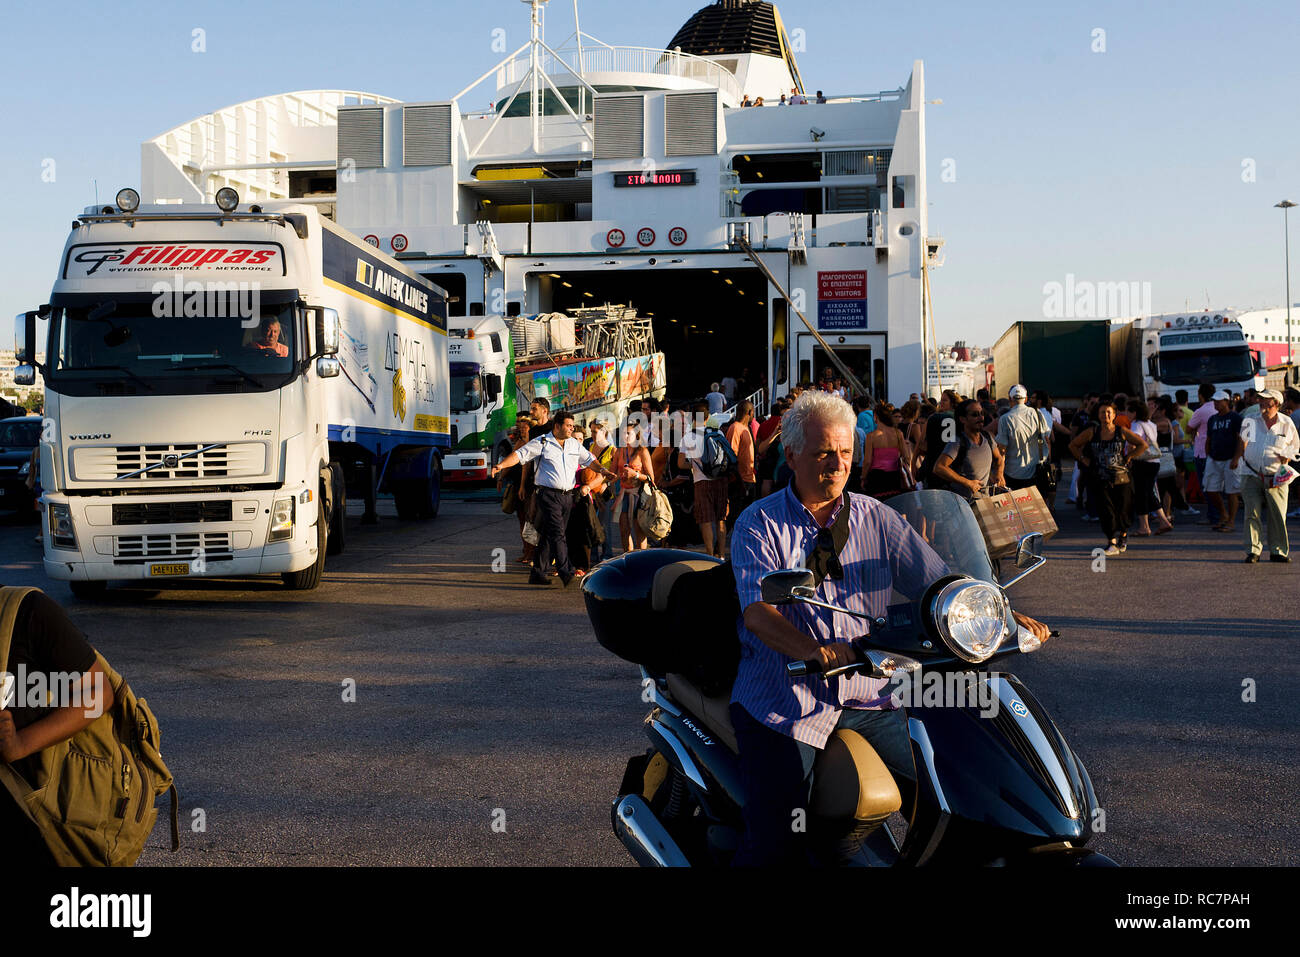 passengers disembarking from a ferry in port of Piraeus, Greece Stock Photo